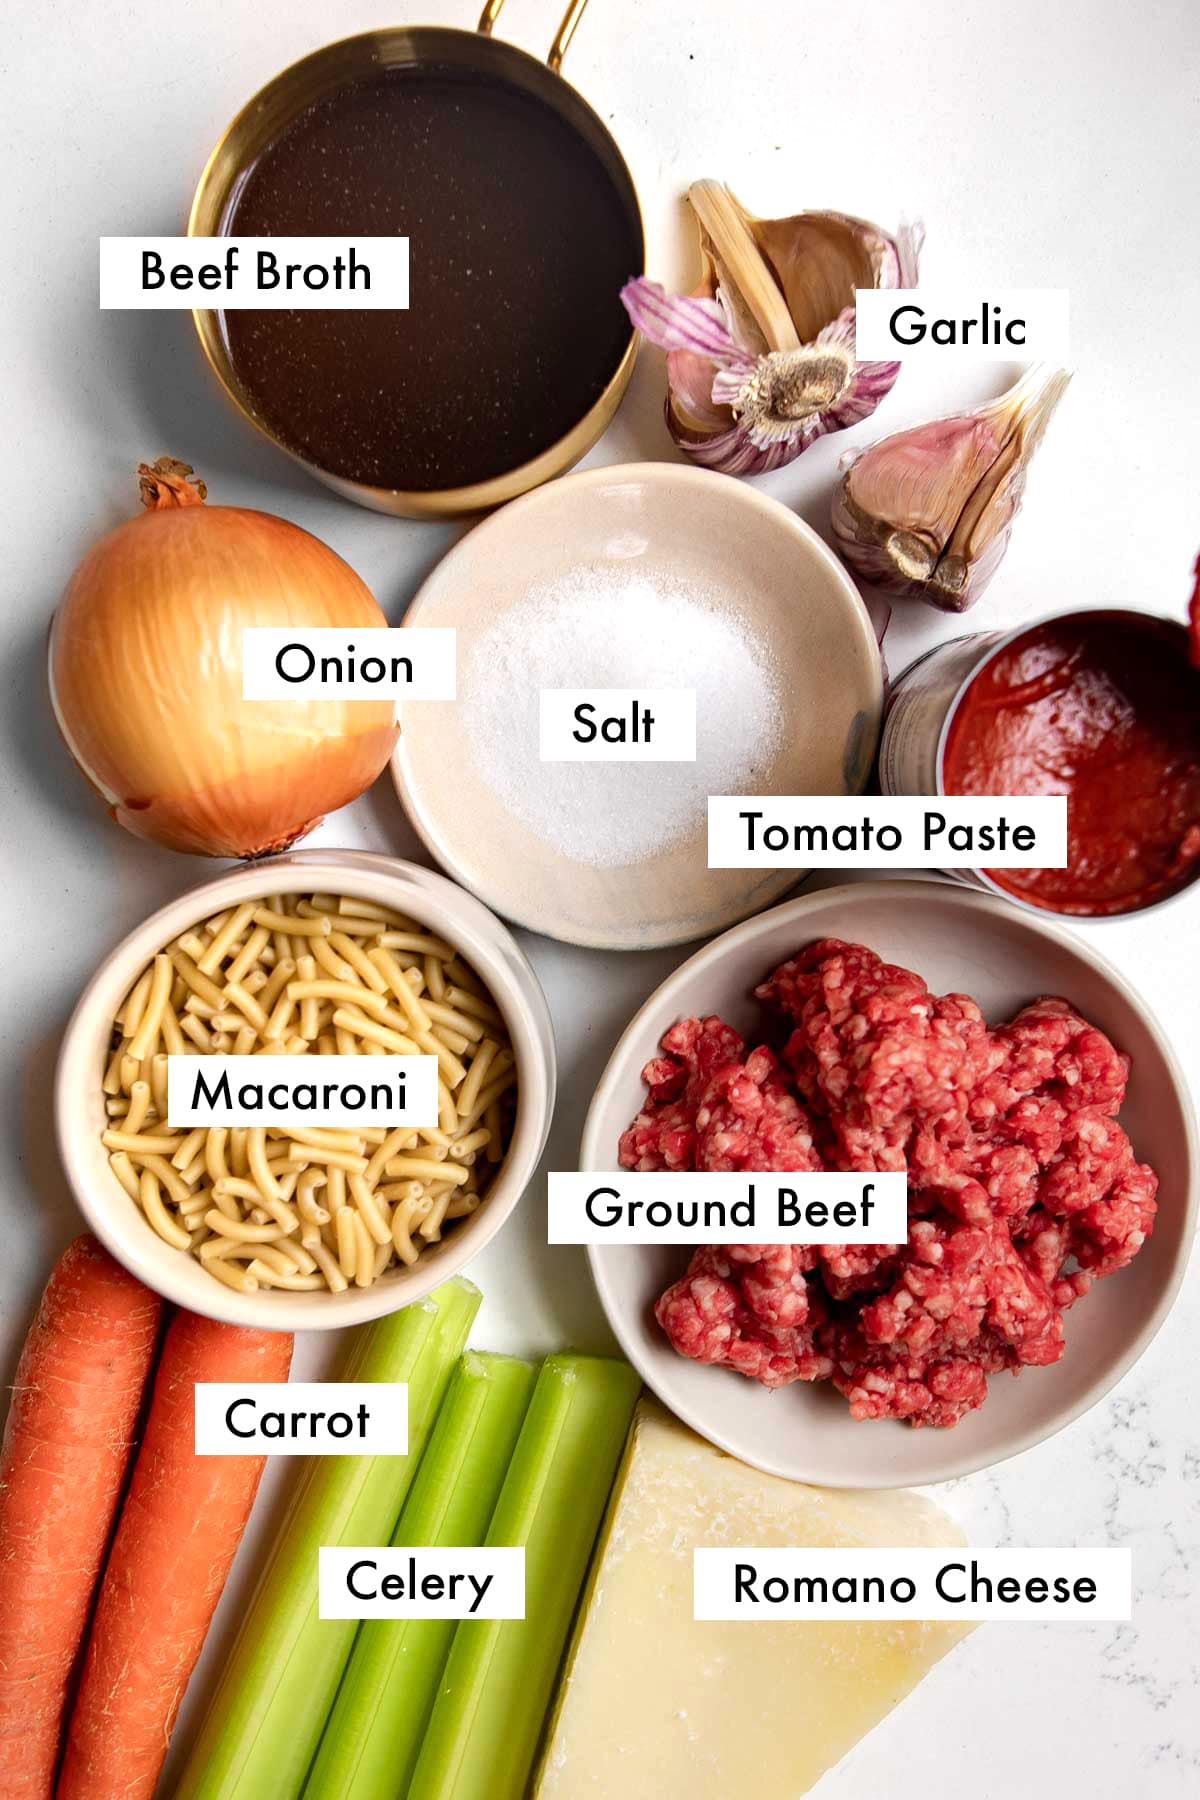 ingredients needed to make homemade beefaroni with text graphics.